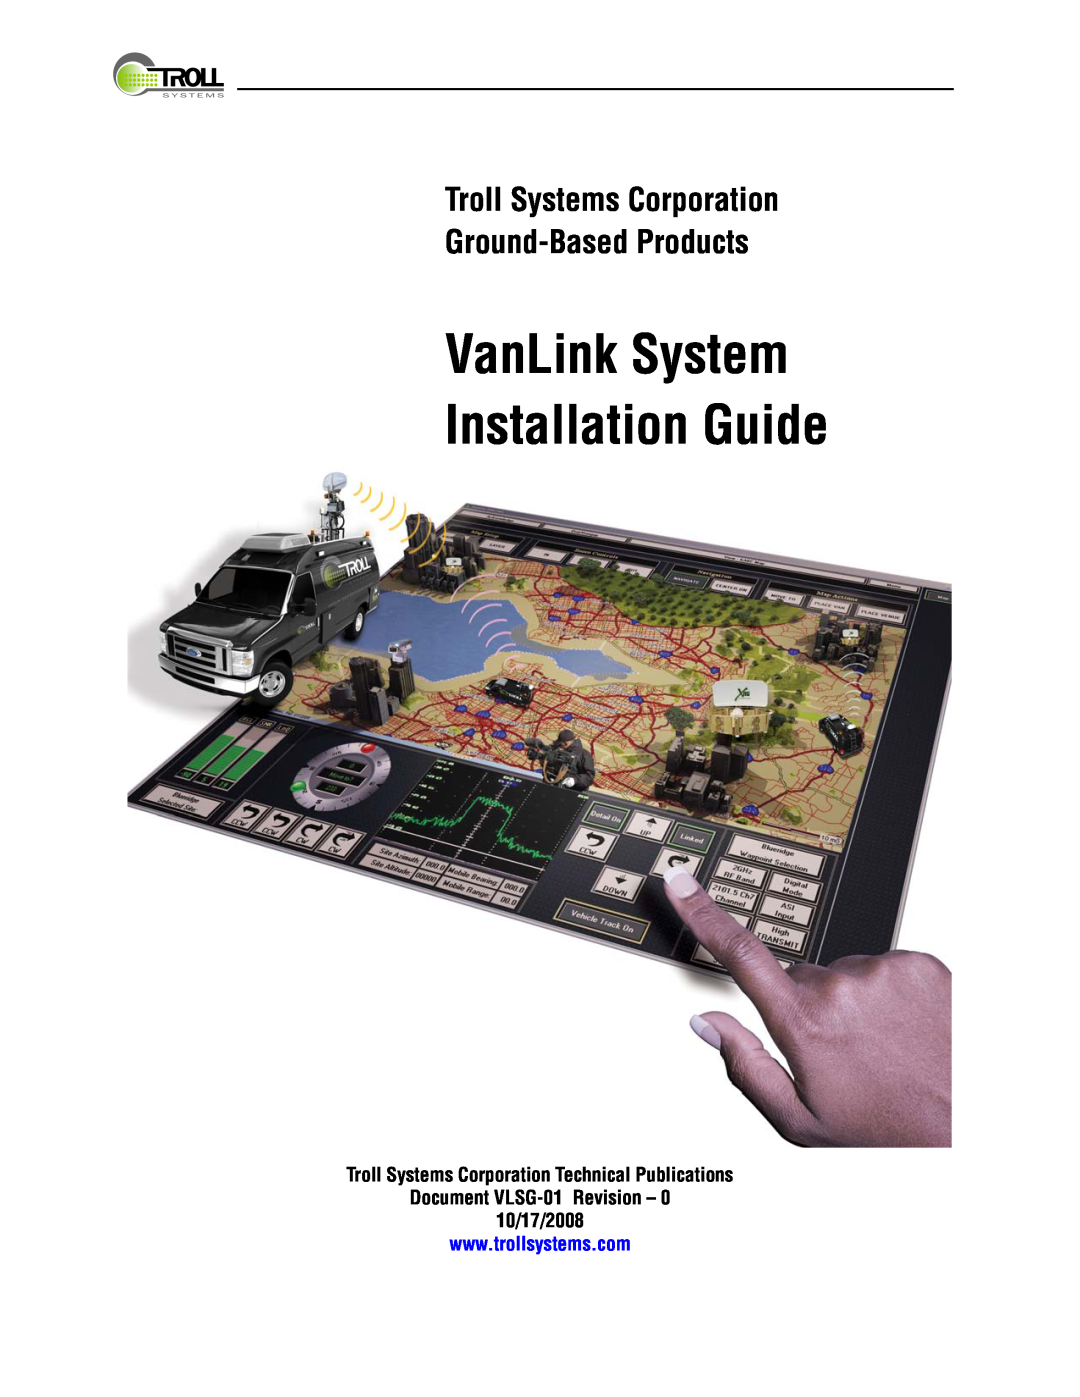 Kyocera VLSG-01 manual VanLink System Installation Guide, Troll Systems Corporation Ground-BasedProducts 